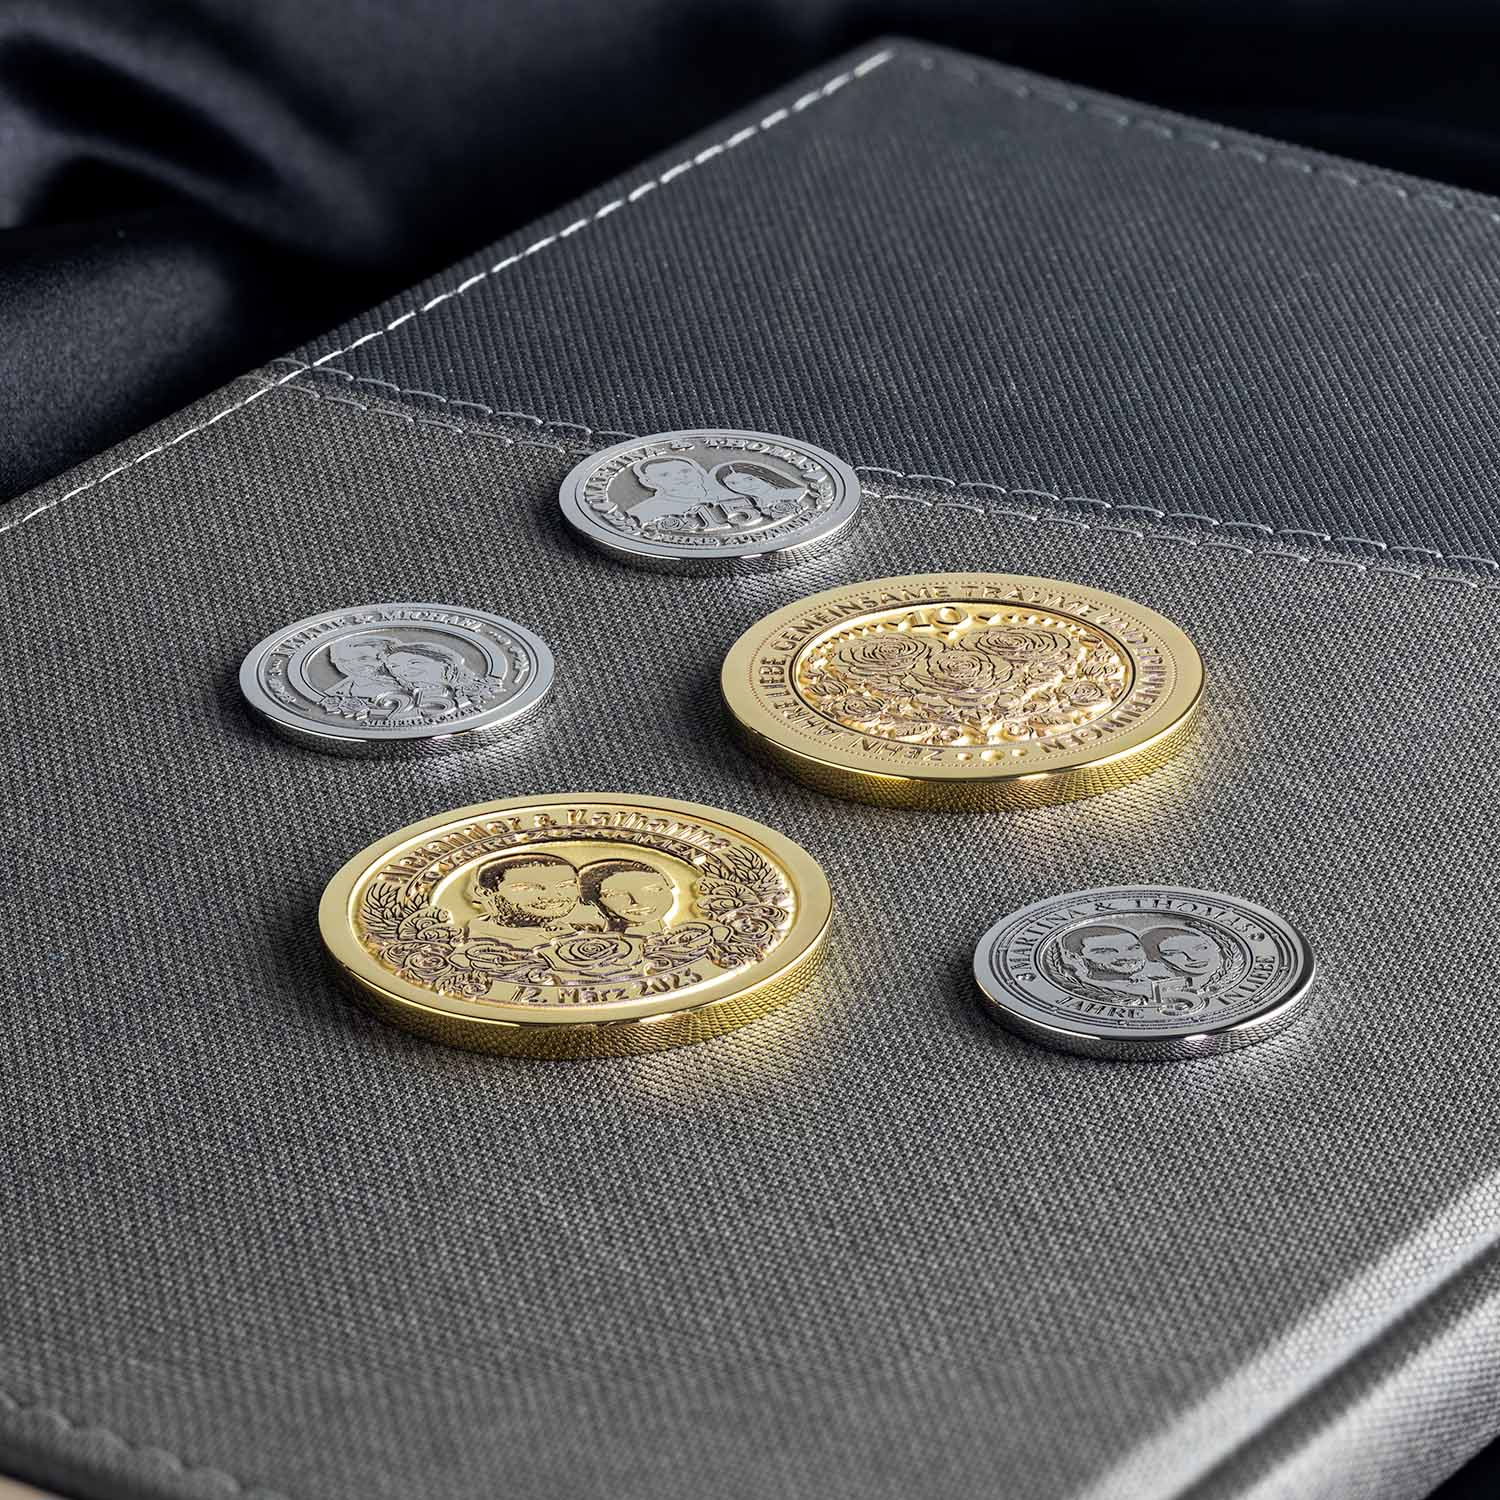 Design Your Own Coin - Unique Keepsakes for Every Occasion - seQua.Shop